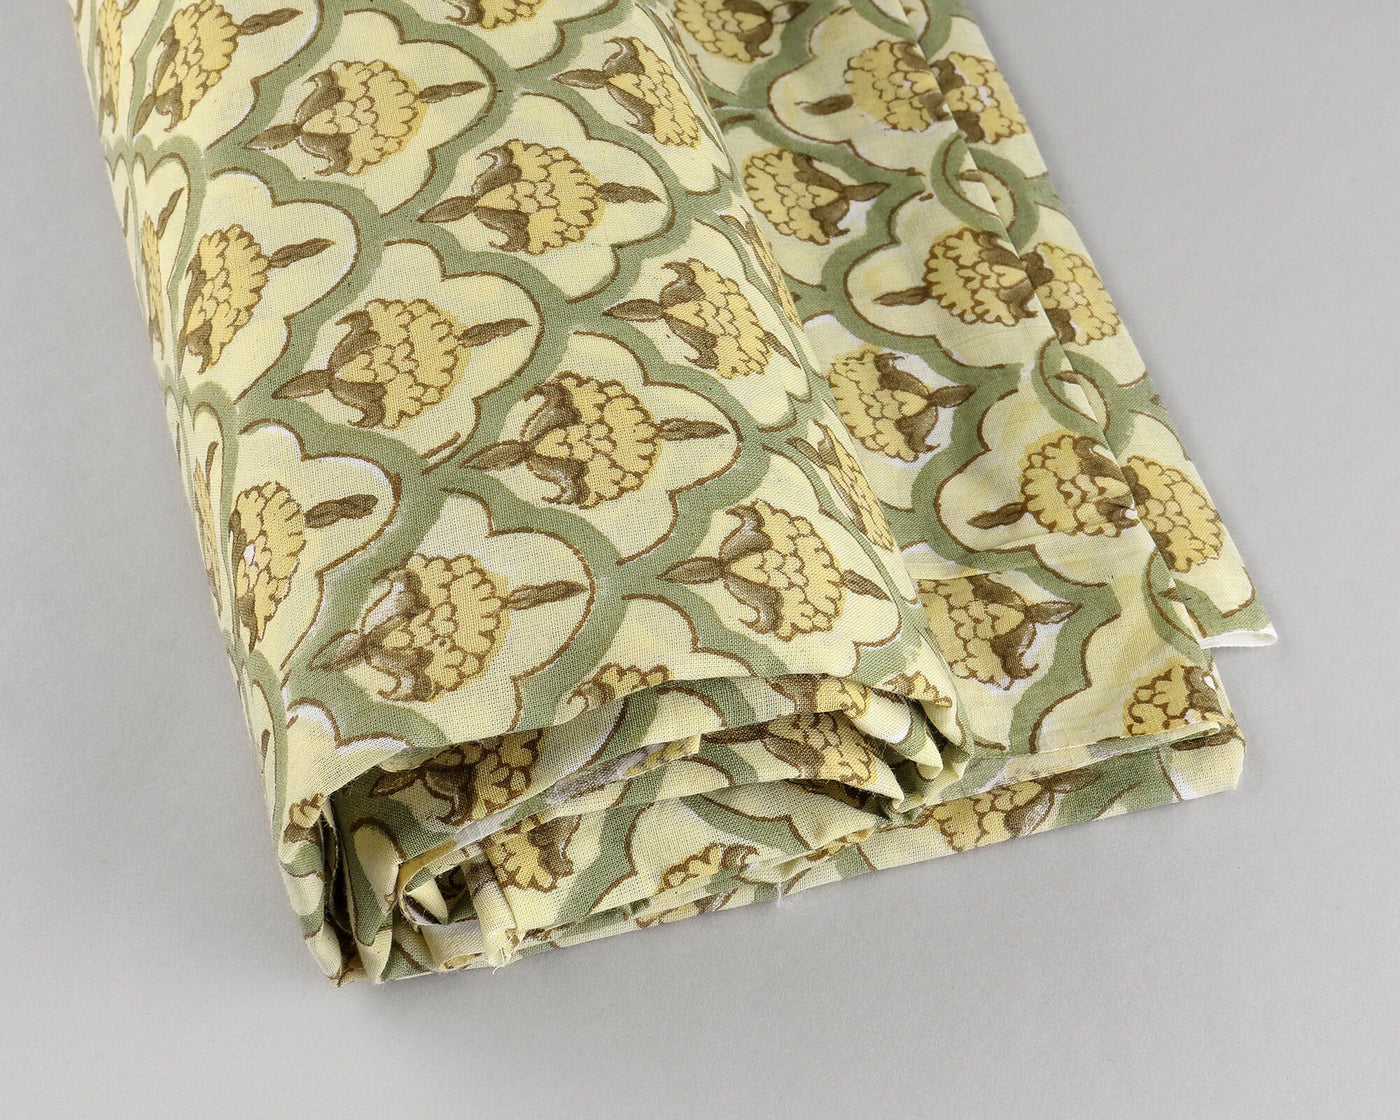 Pale Goldenrod and Iguana Green Indian Floral Hand Block Printed 100% Pure Cotton Cloth, Fabric by the yard, Women's Clothing Curtains Bags